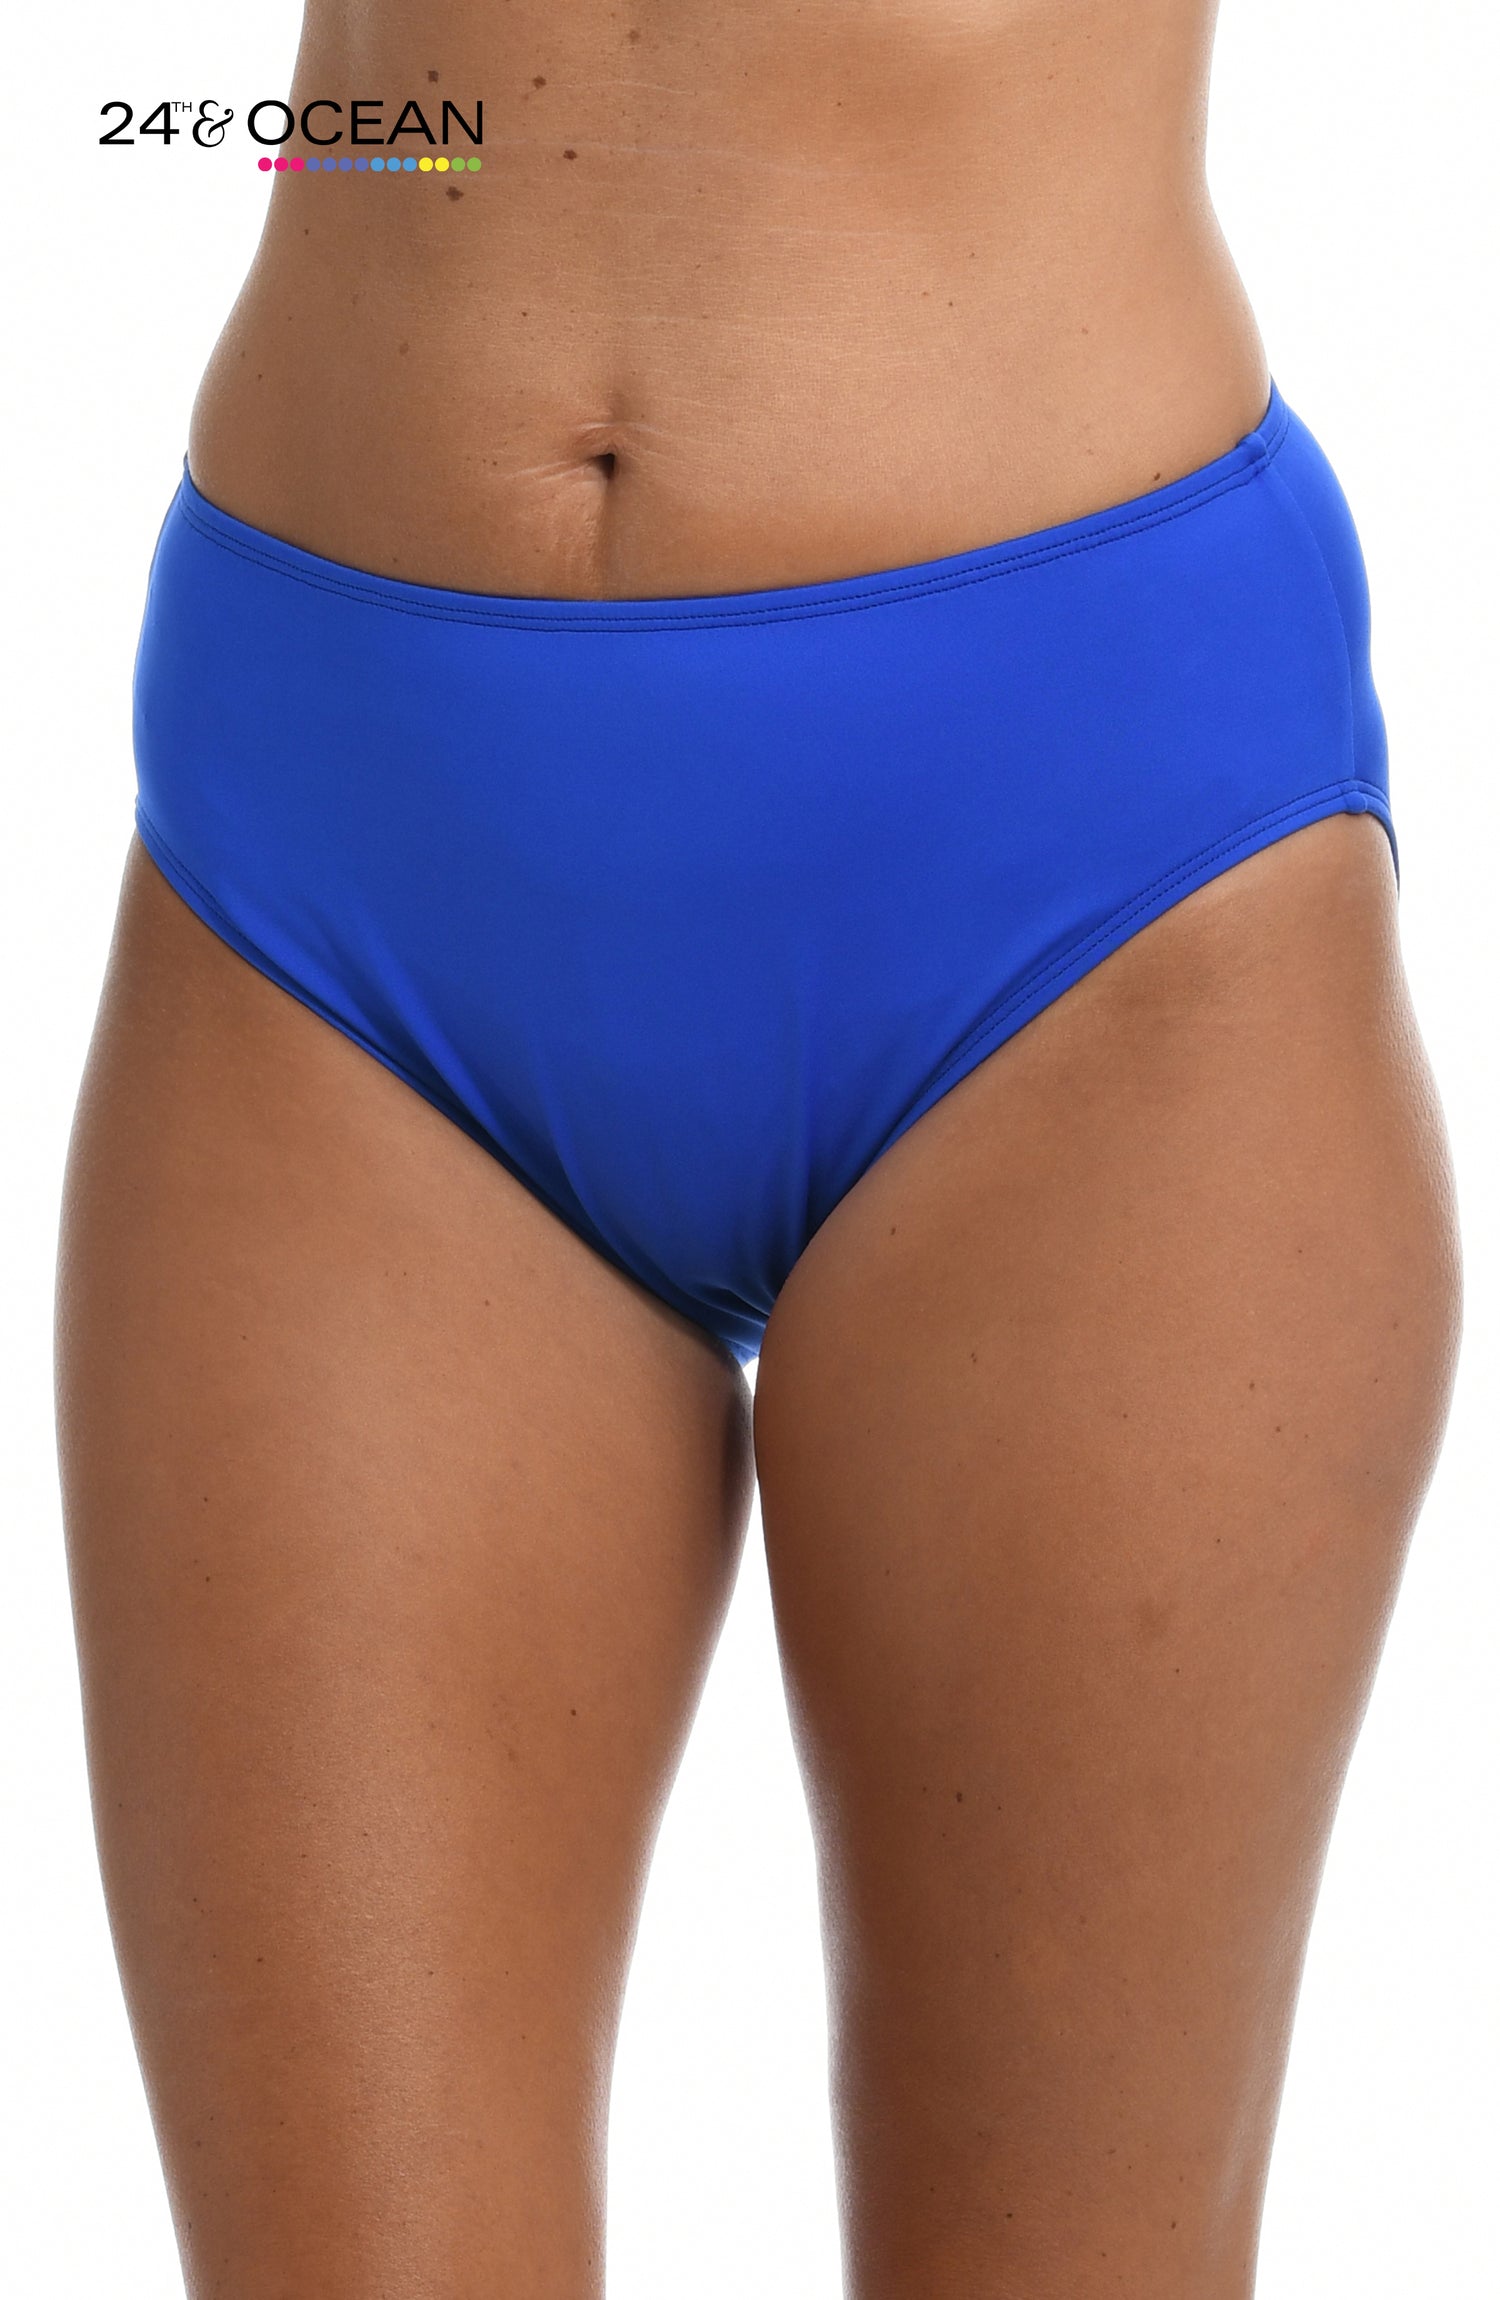 Model is wearing a solid sapphire blue colored mid waist hipster bikini bottom from our 24th & Ocean brand.